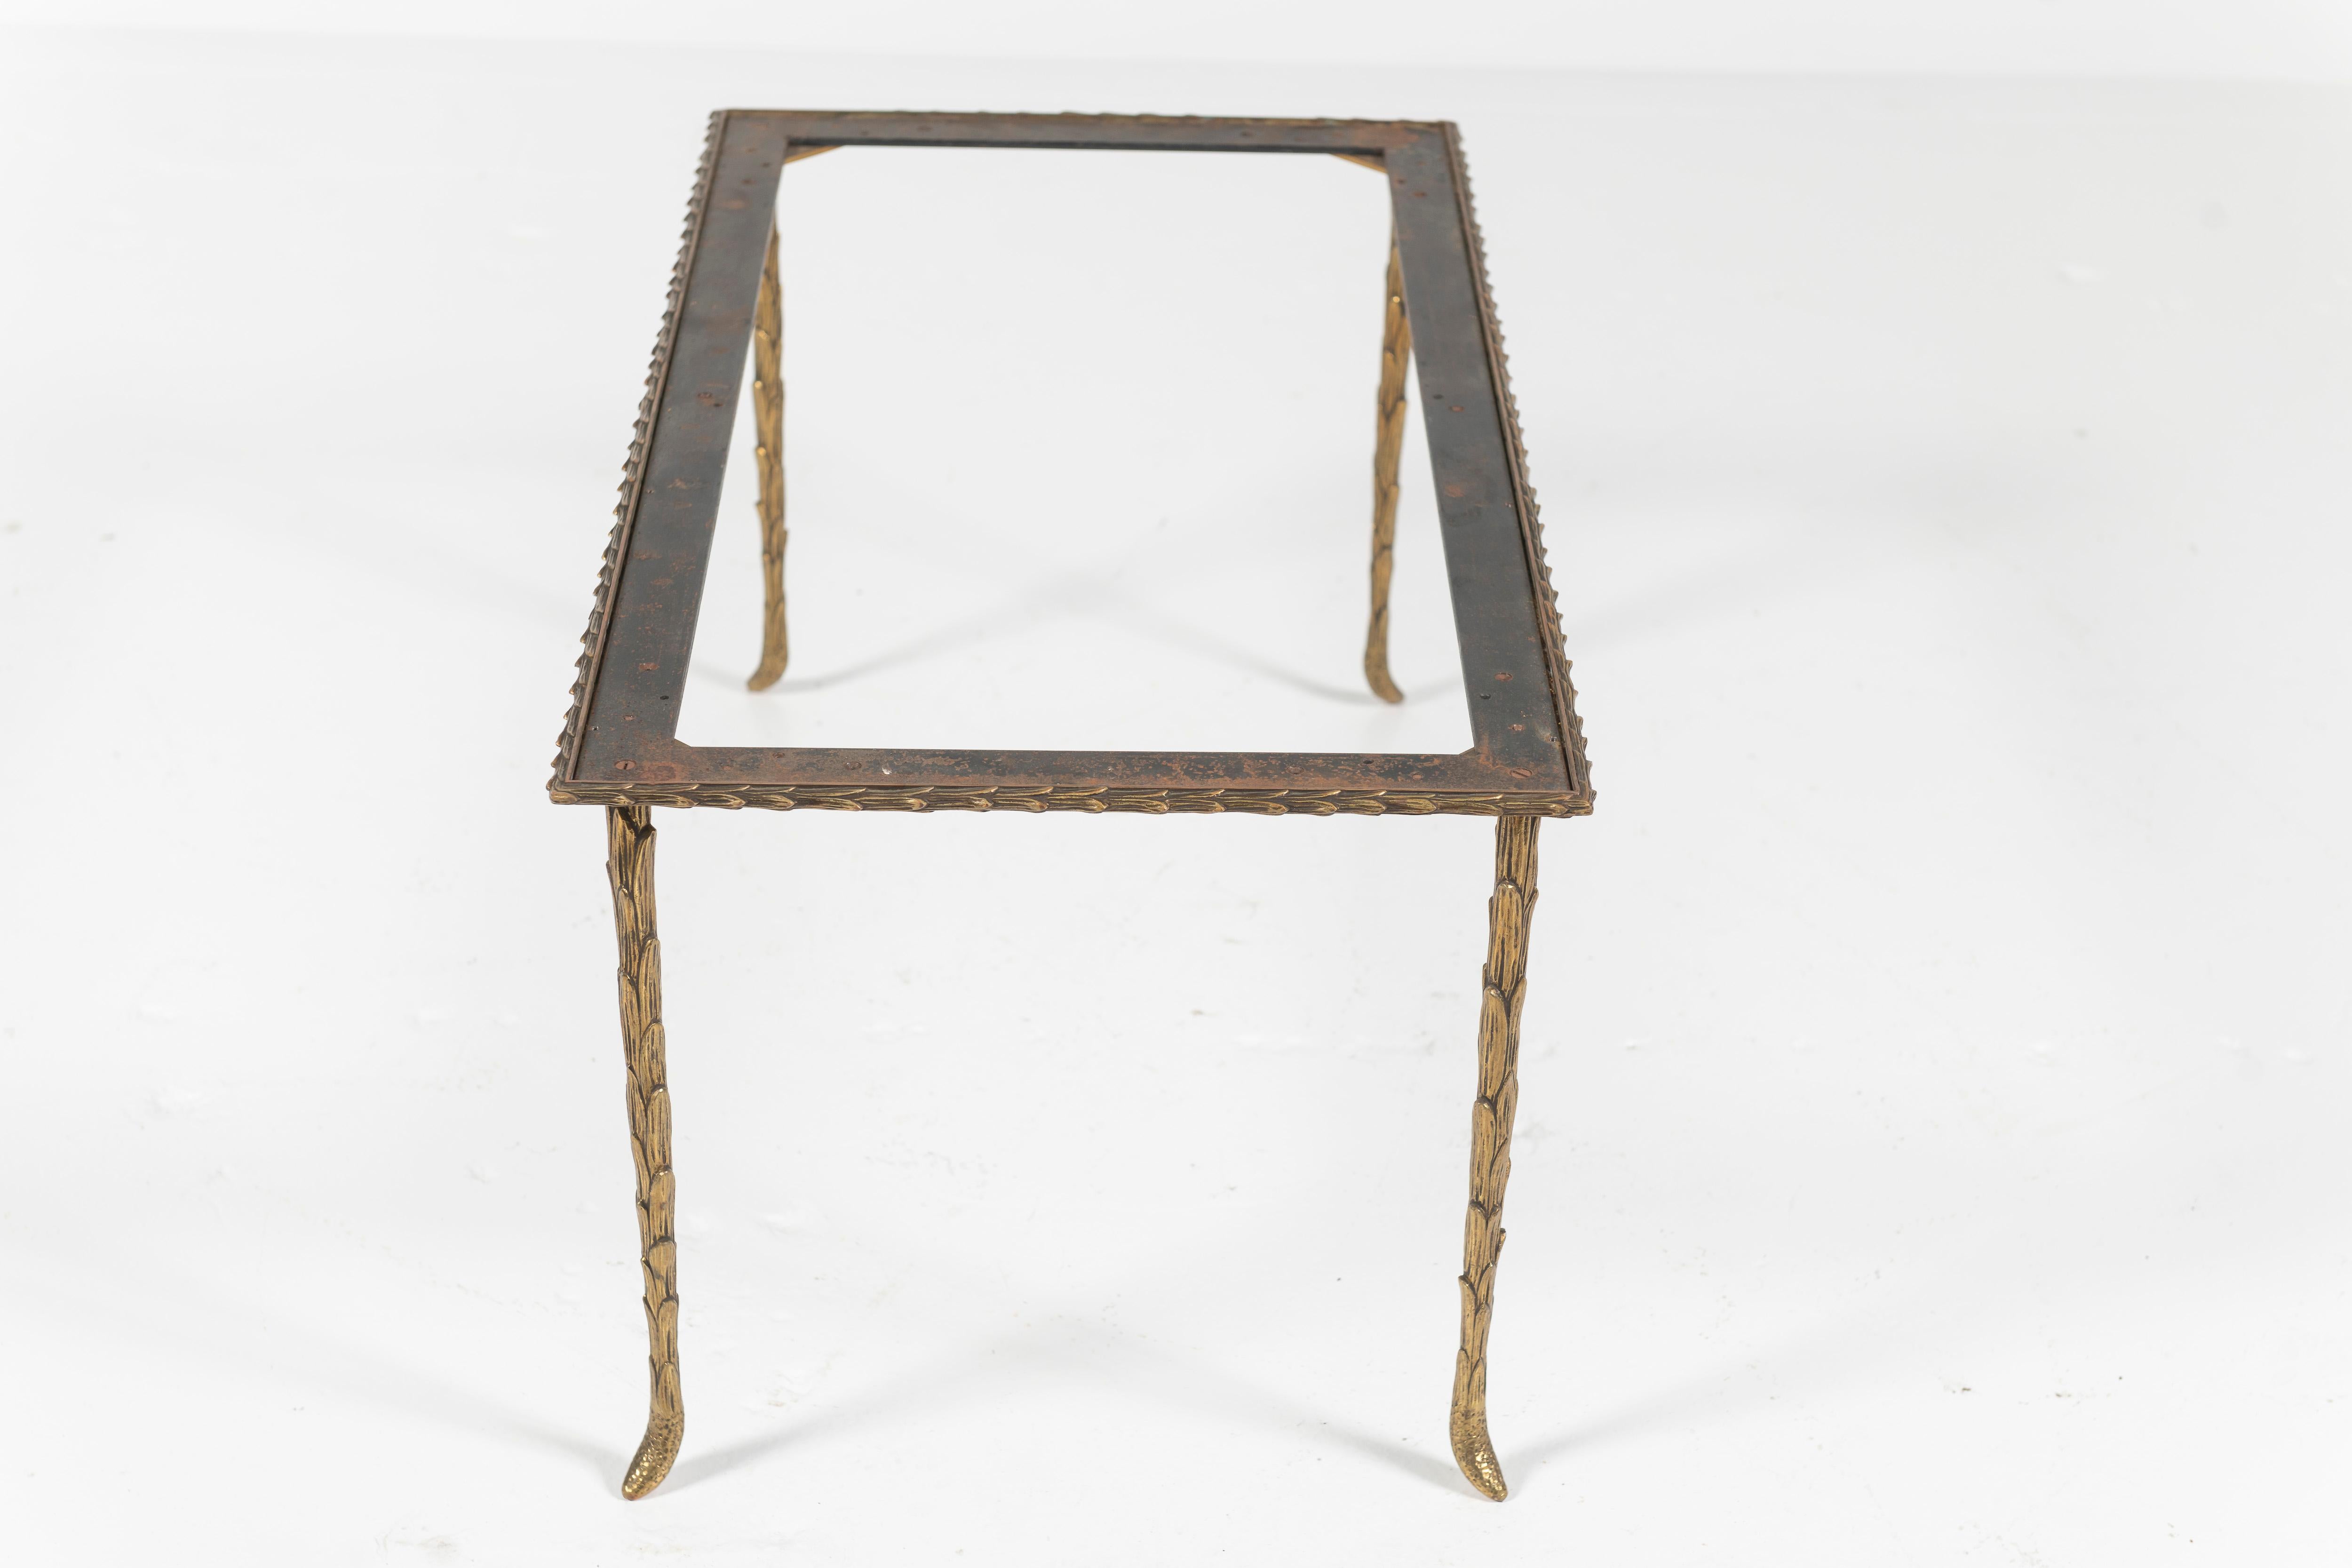 Beautiful rectangular mid-sized coffee table in bronze by Masion Bagues,  France. Cast bronze legs are of a palm-like pattern. Install your own top, such as gilded mirrored glass, smoked glass, marble or wood. Vintage elegance at its finest.